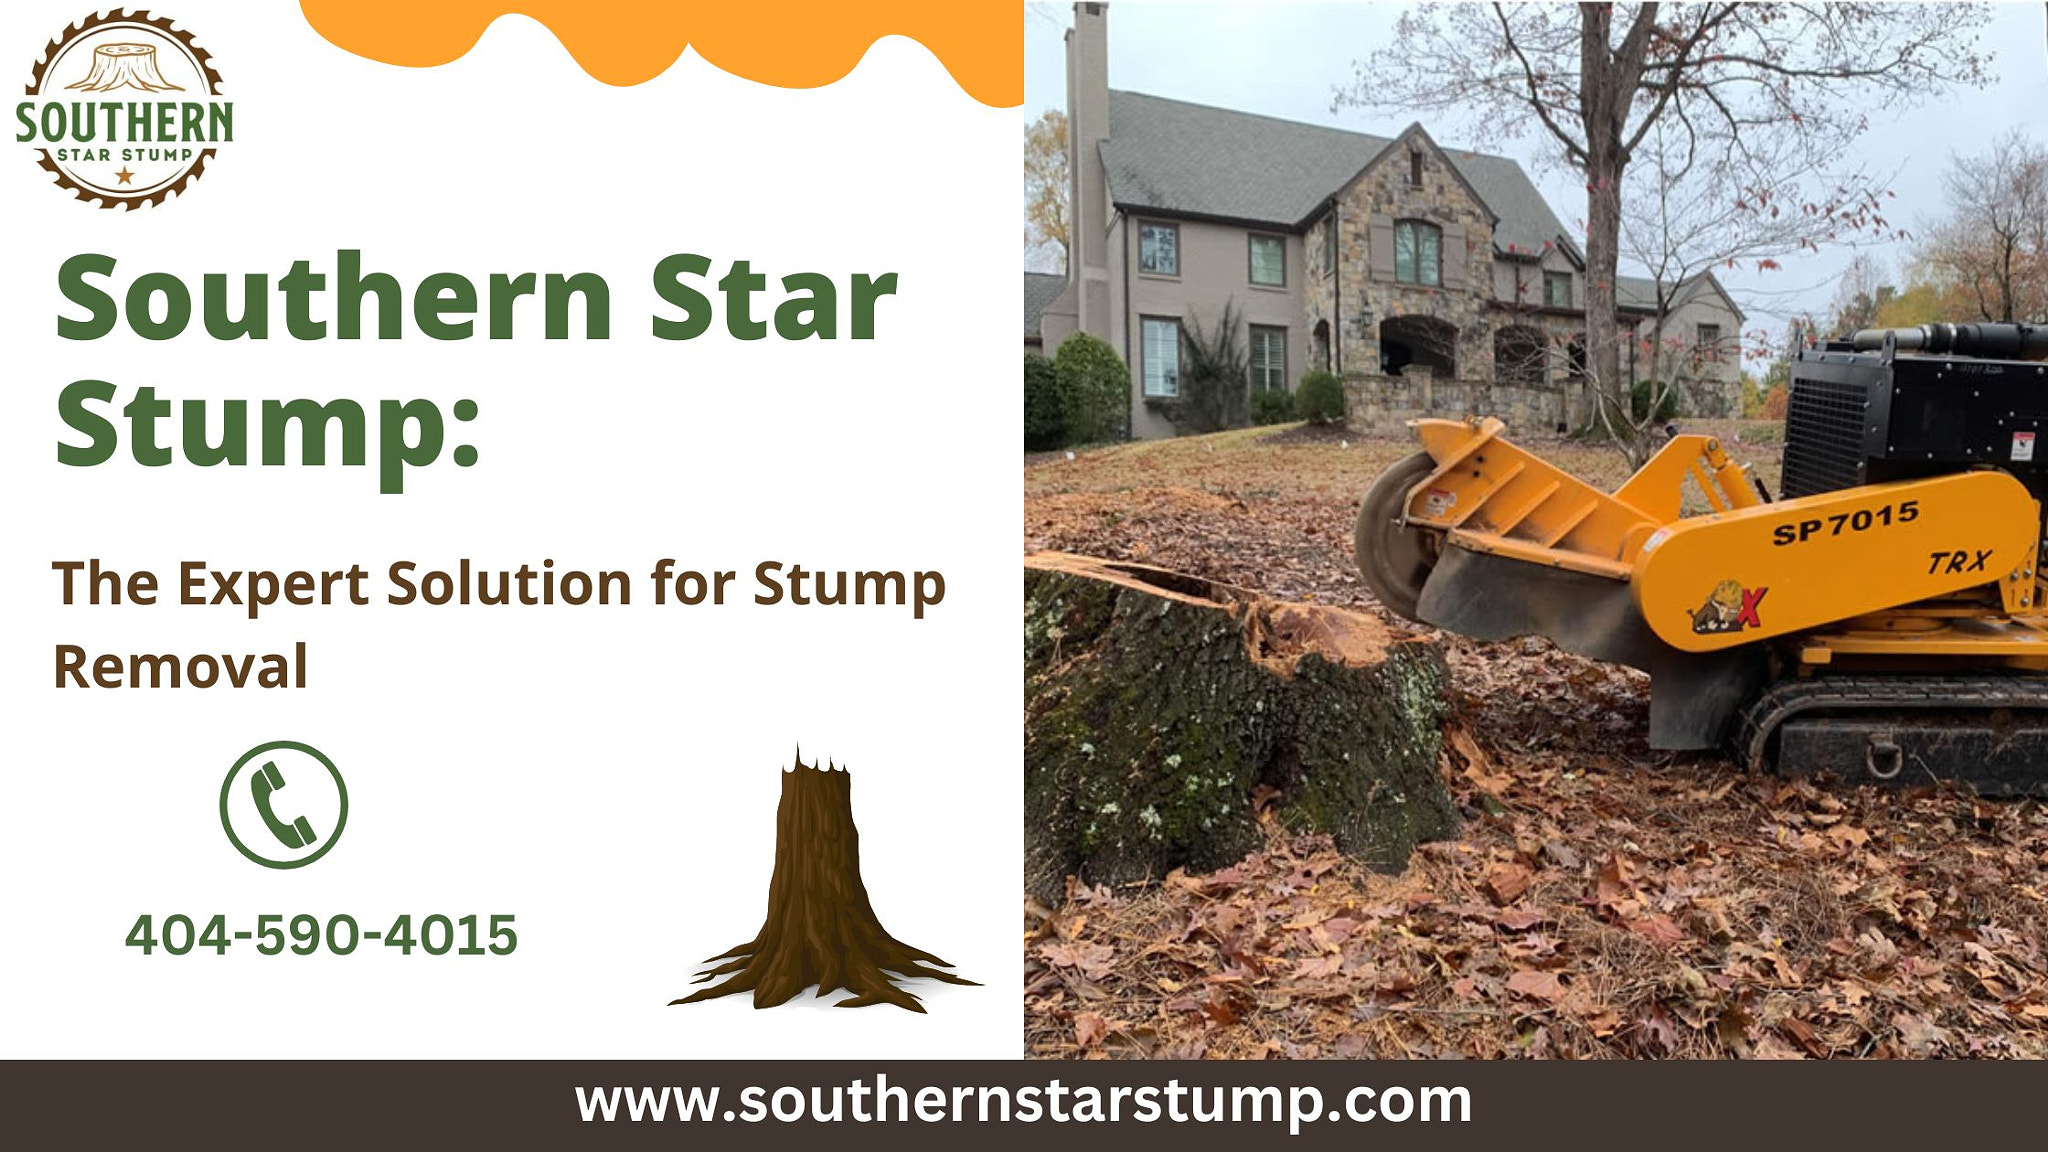 Southern Star Stump: The Expert Solution for Stump Removal